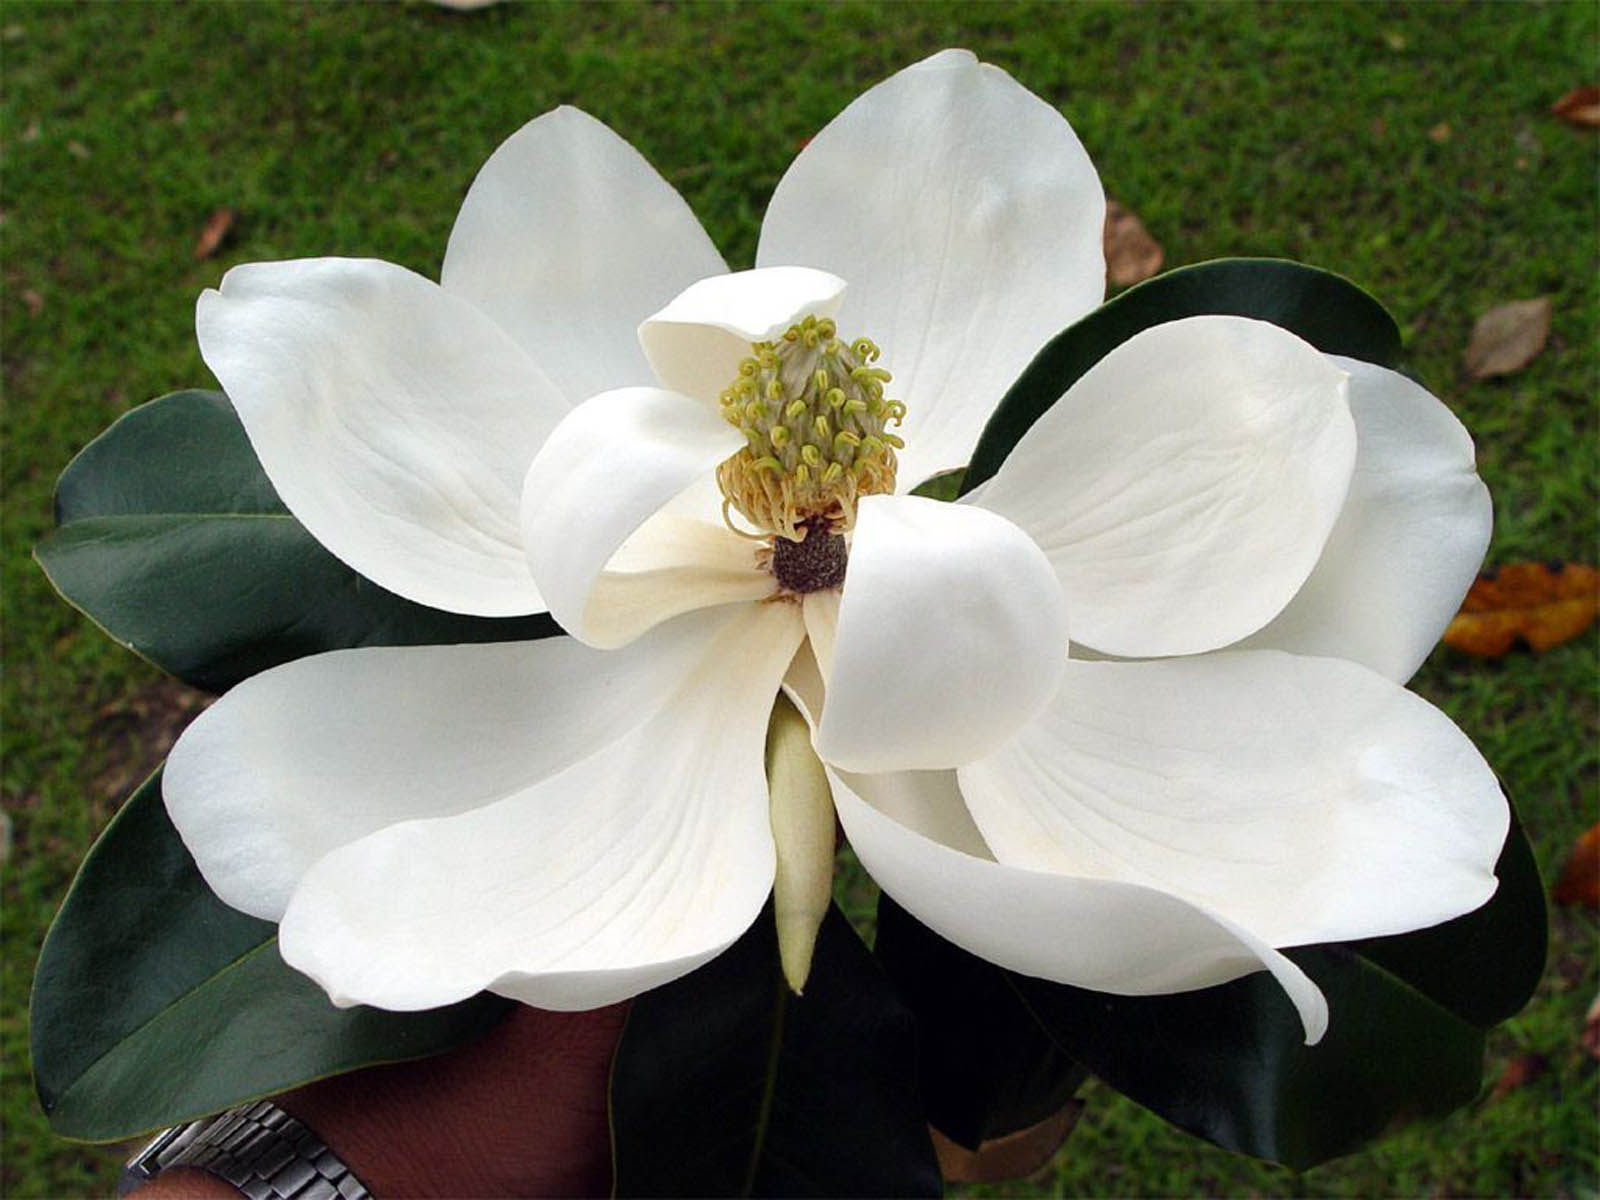 Wallpapers Southern Magnolia Flower Wallpapers HD Wallpapers Download Free Map Images Wallpaper [wallpaper376.blogspot.com]